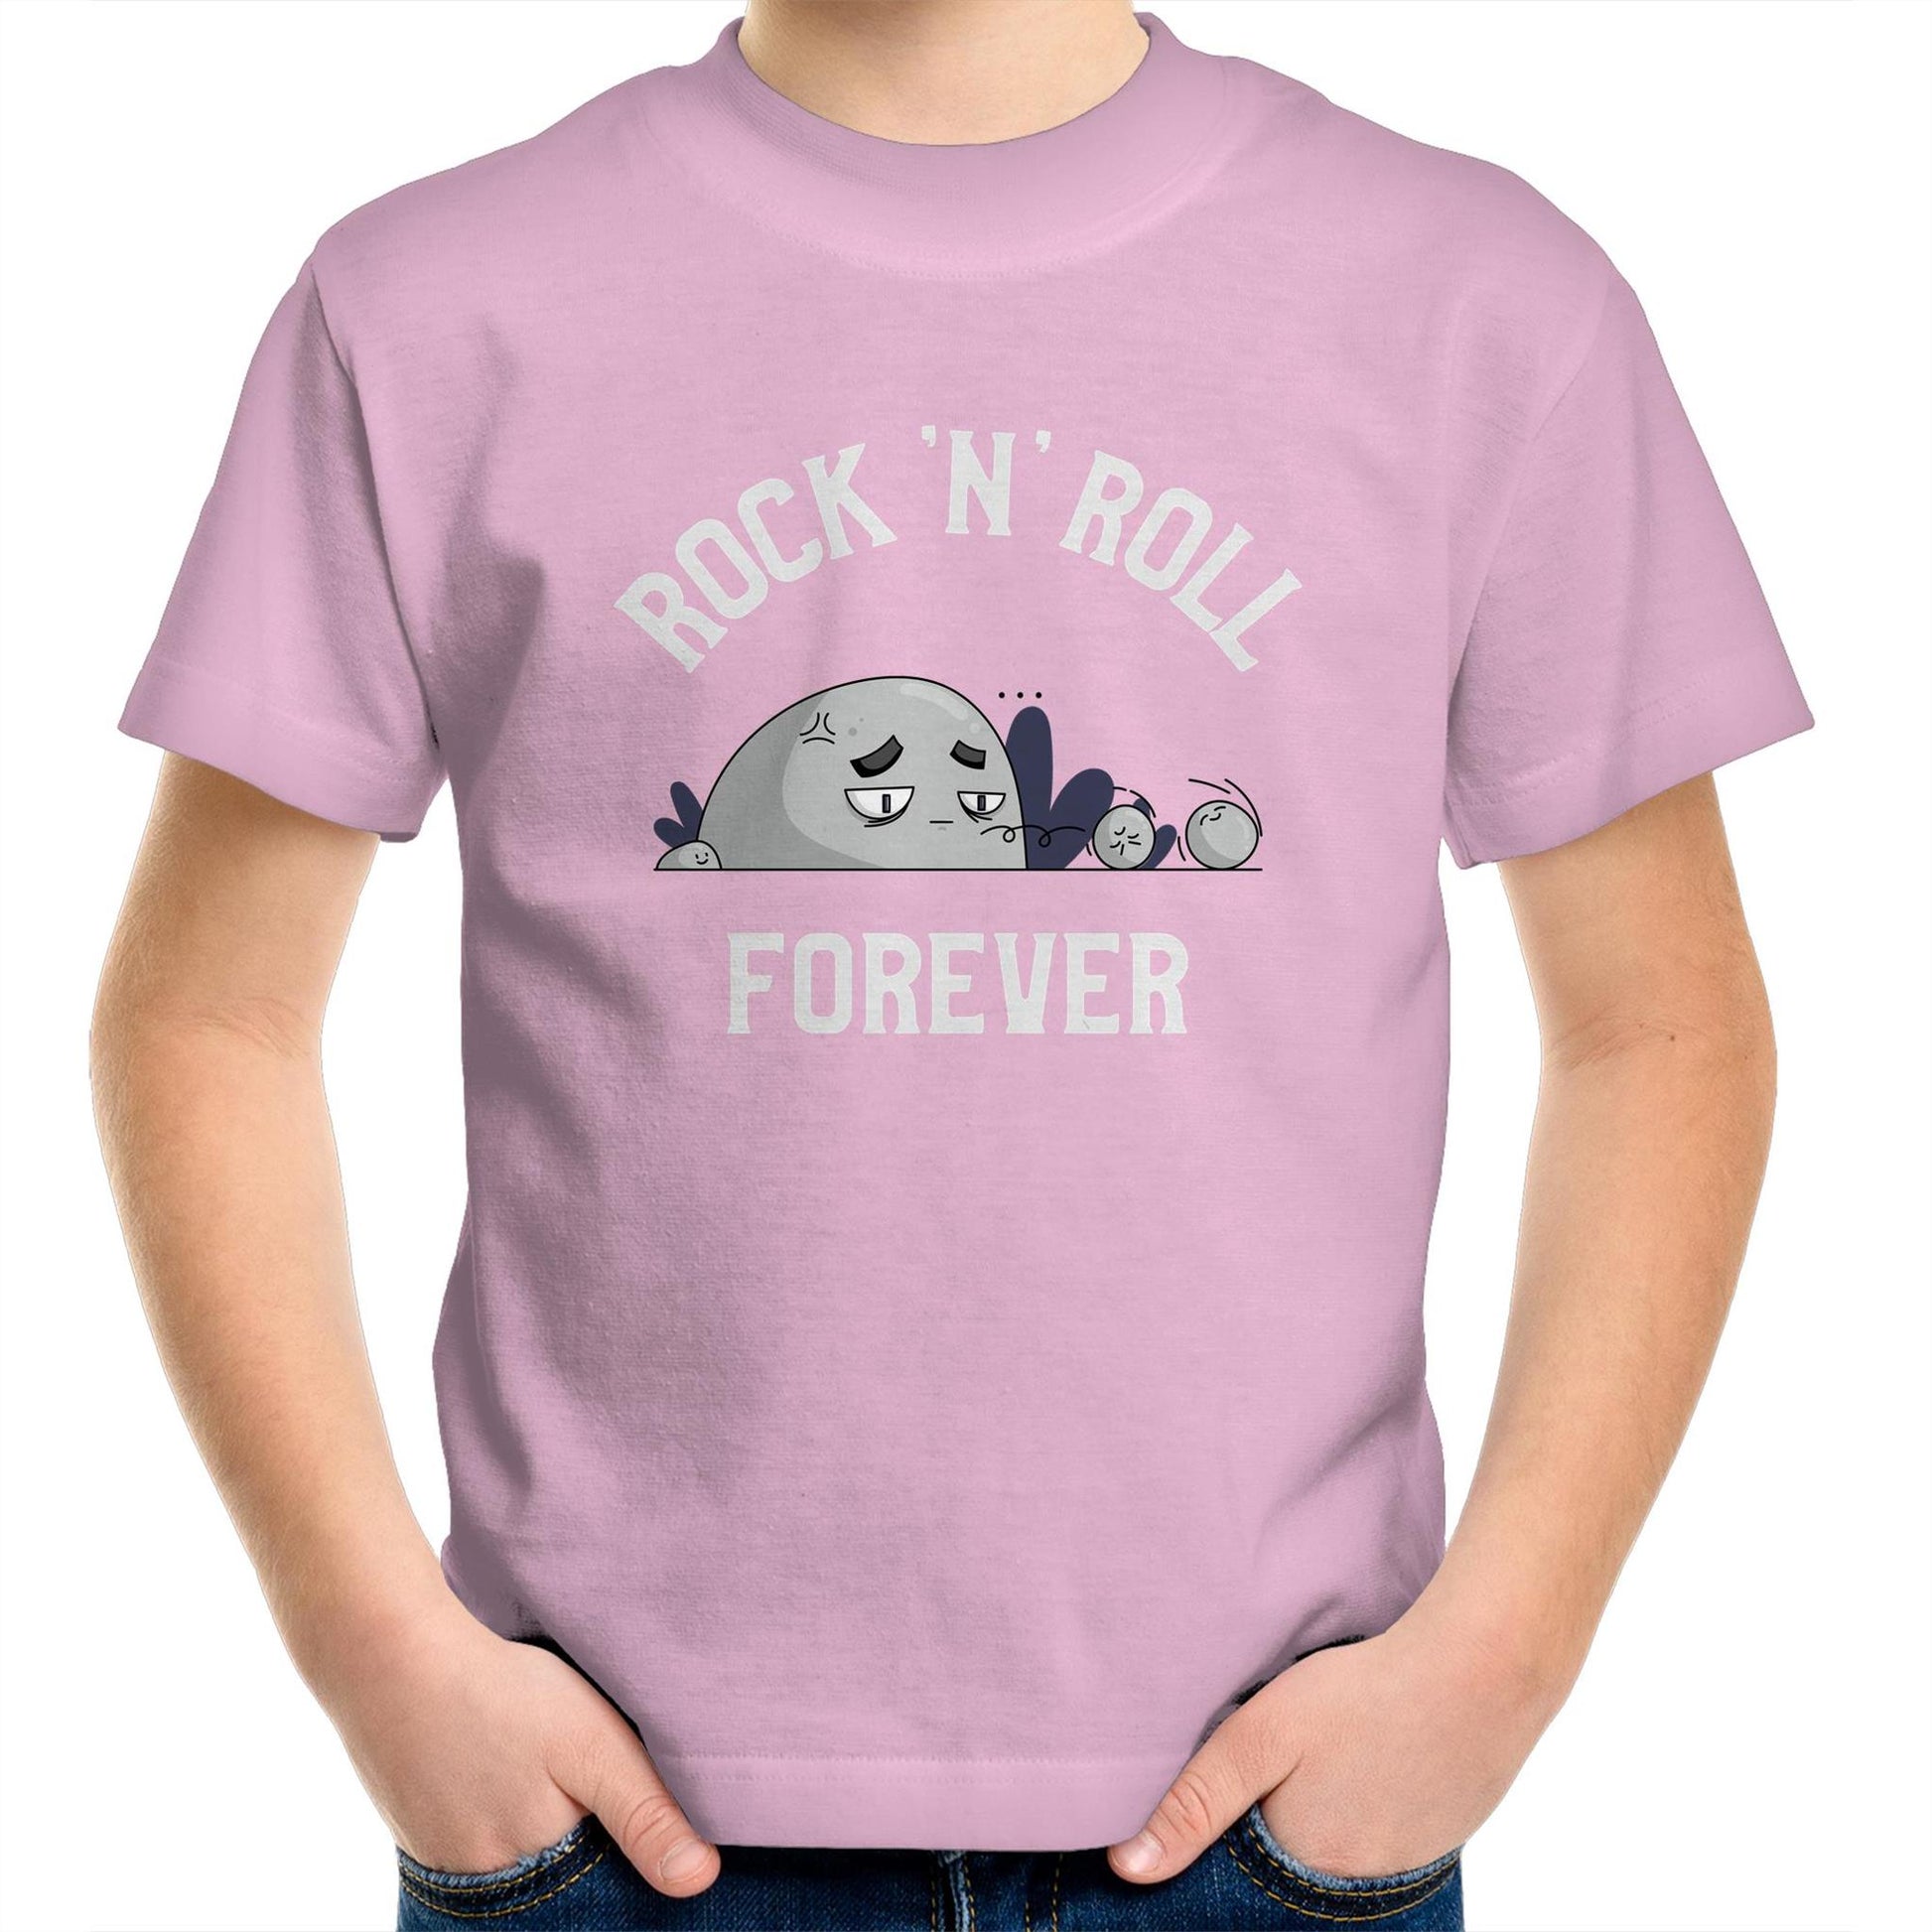 Rock 'N' Roll Forever - Kids Youth T-Shirt Pink Kids Youth T-shirt Music